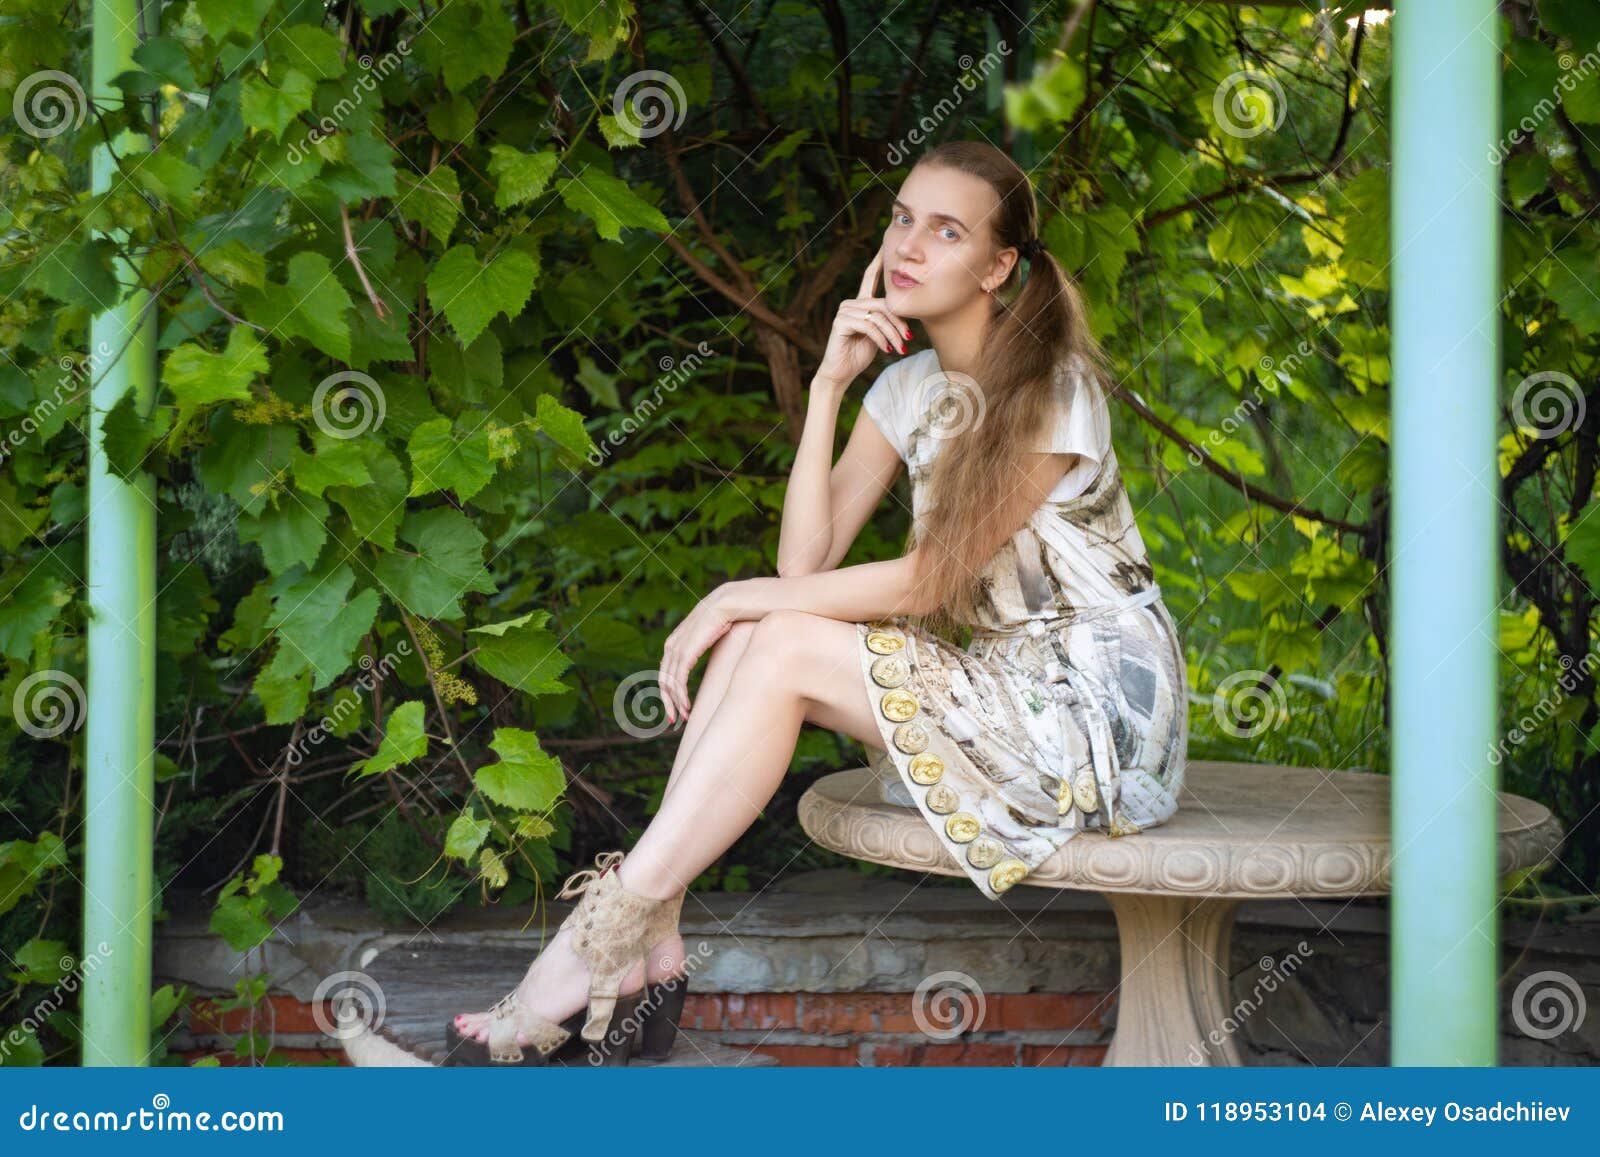 Girl is Seating Near Green Vine Stock Photo - Image of hand, fashion ...